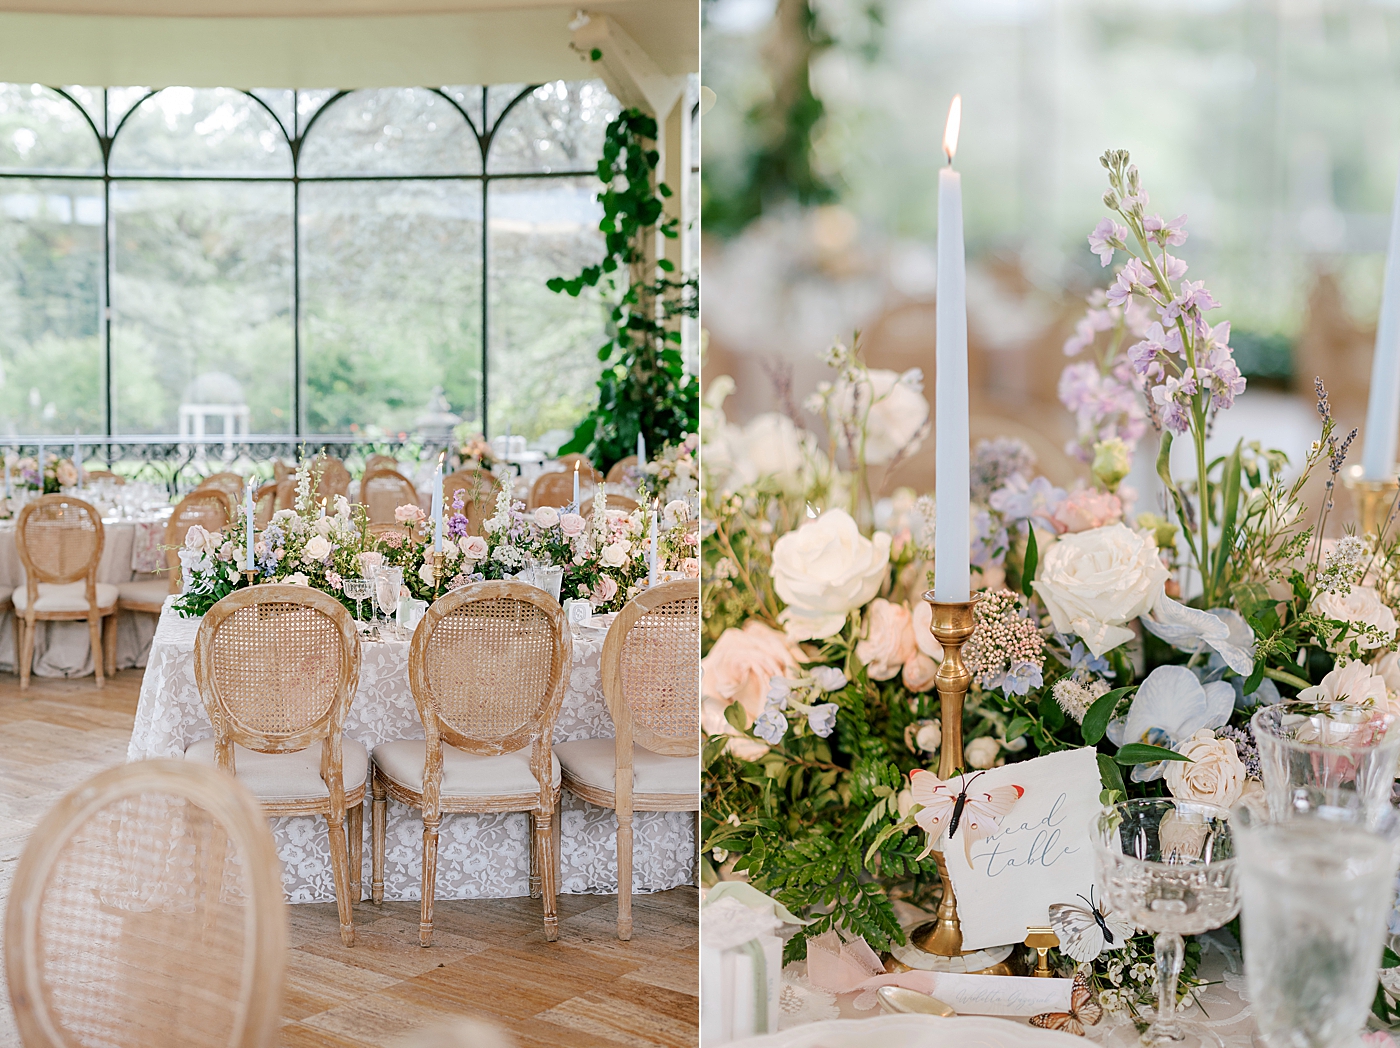 Reception details with floral tablecloths and flowers | Image by Hope Helmuth Photography